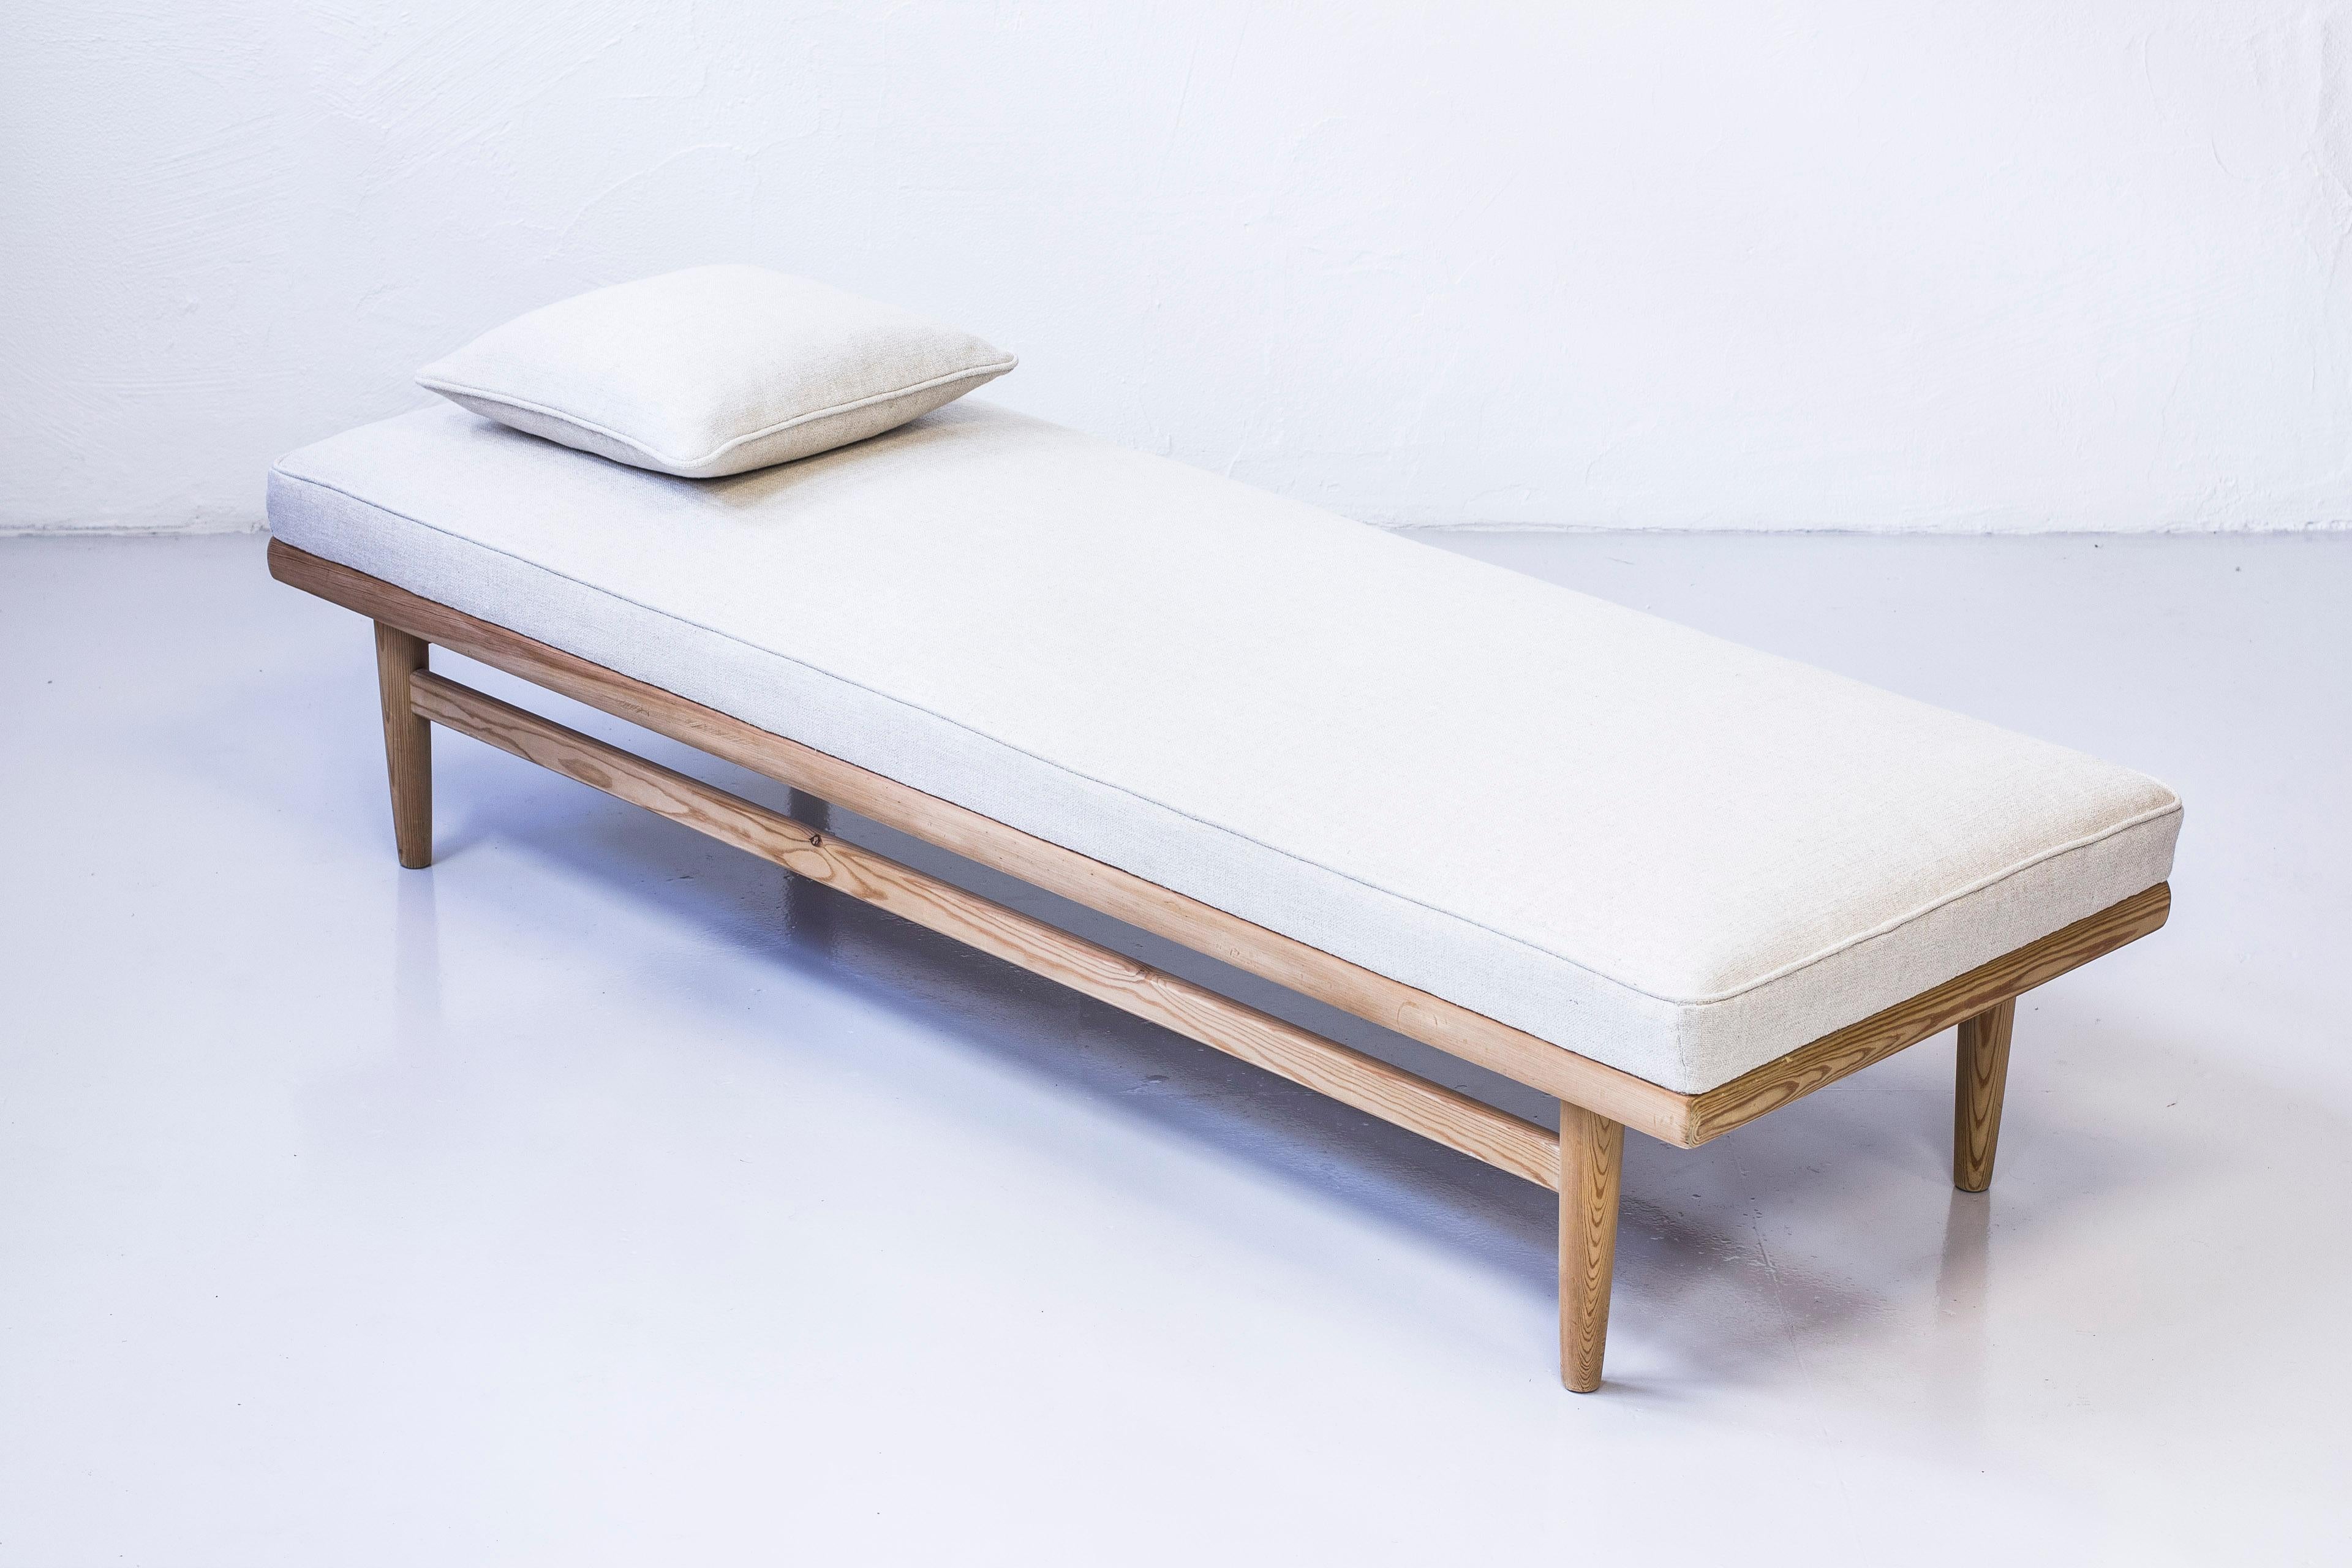 Daybed designed by Harry Moen for Bruksbo Tegnekontor. Produced by Konrad Steinstads Snekkerverksted in Norway, circa 1961. Made from solid untreated pine with new linen upholstery in greige. Very good condition with few signs of wear and light